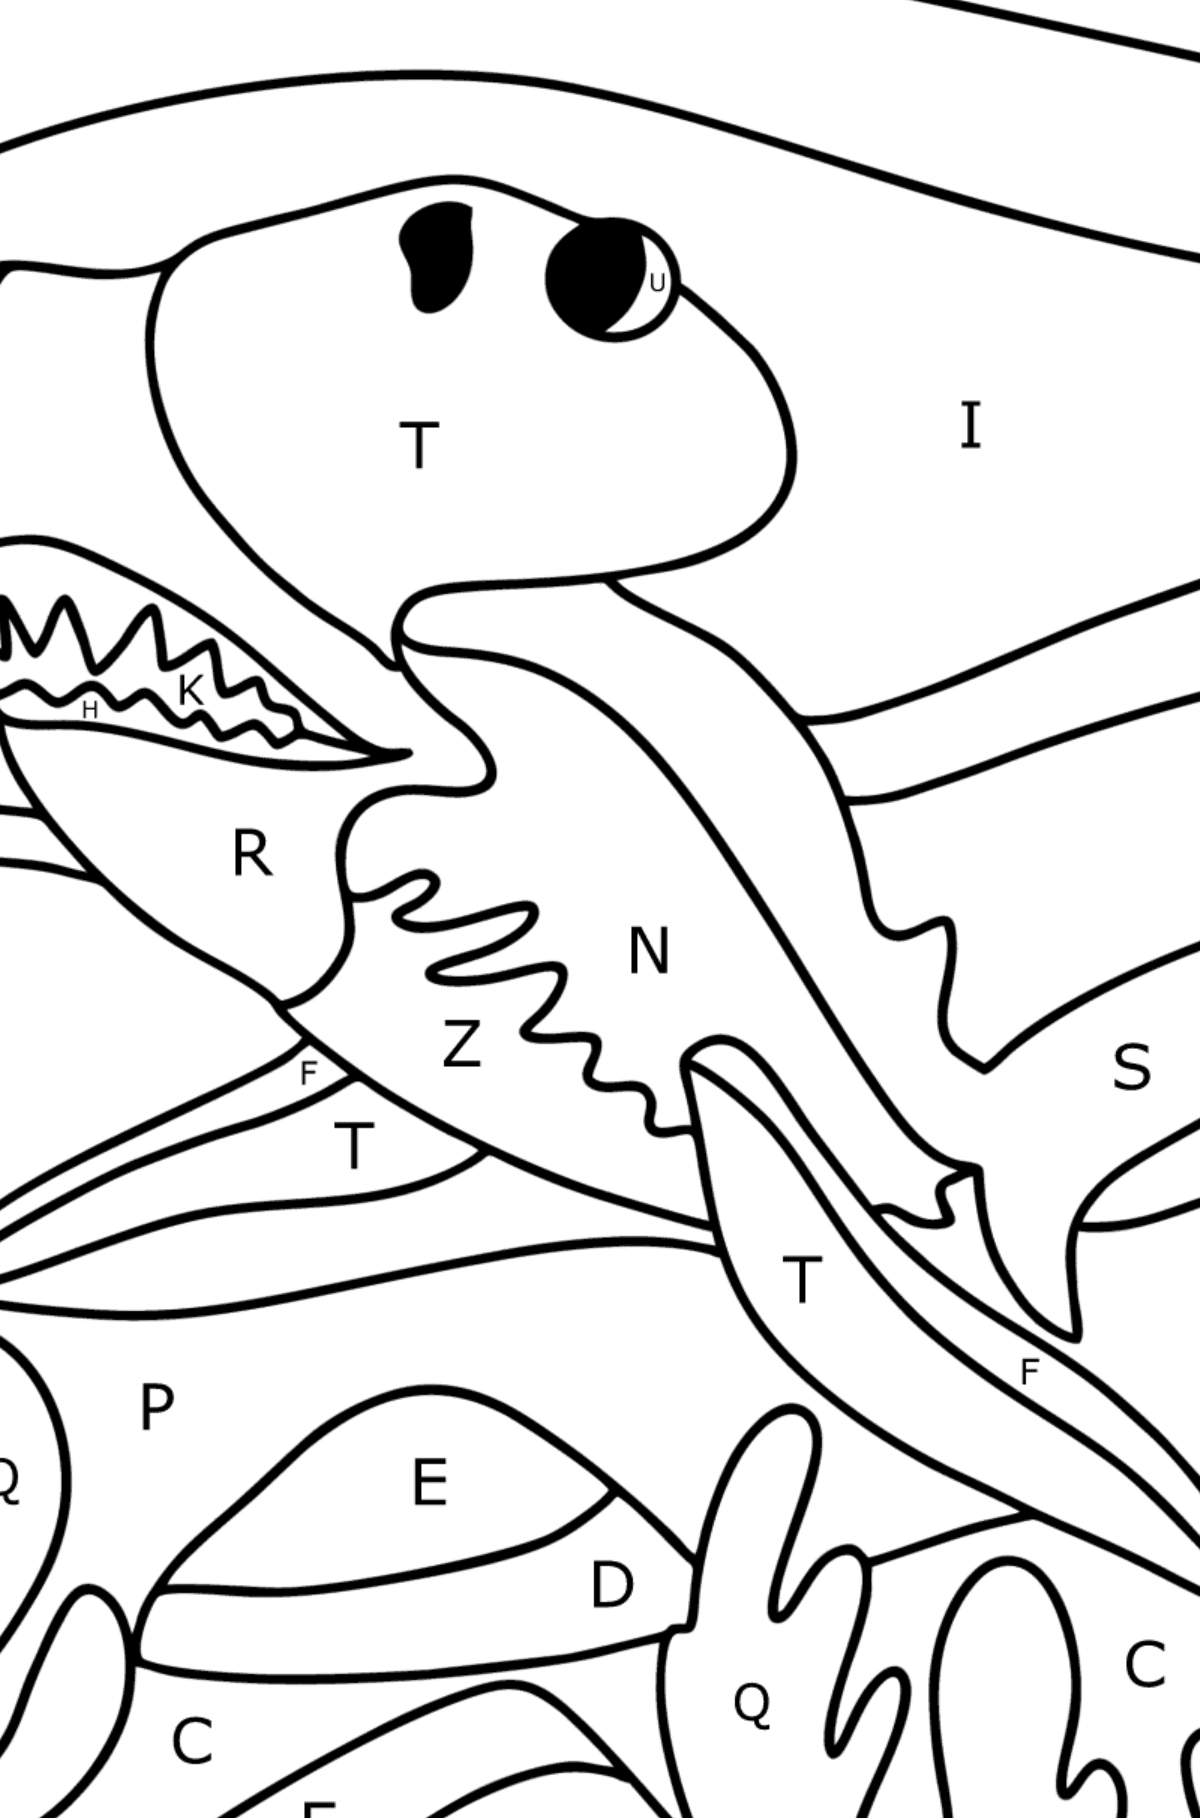 Hammerhead shark coloring page - Coloring by Letters for Kids